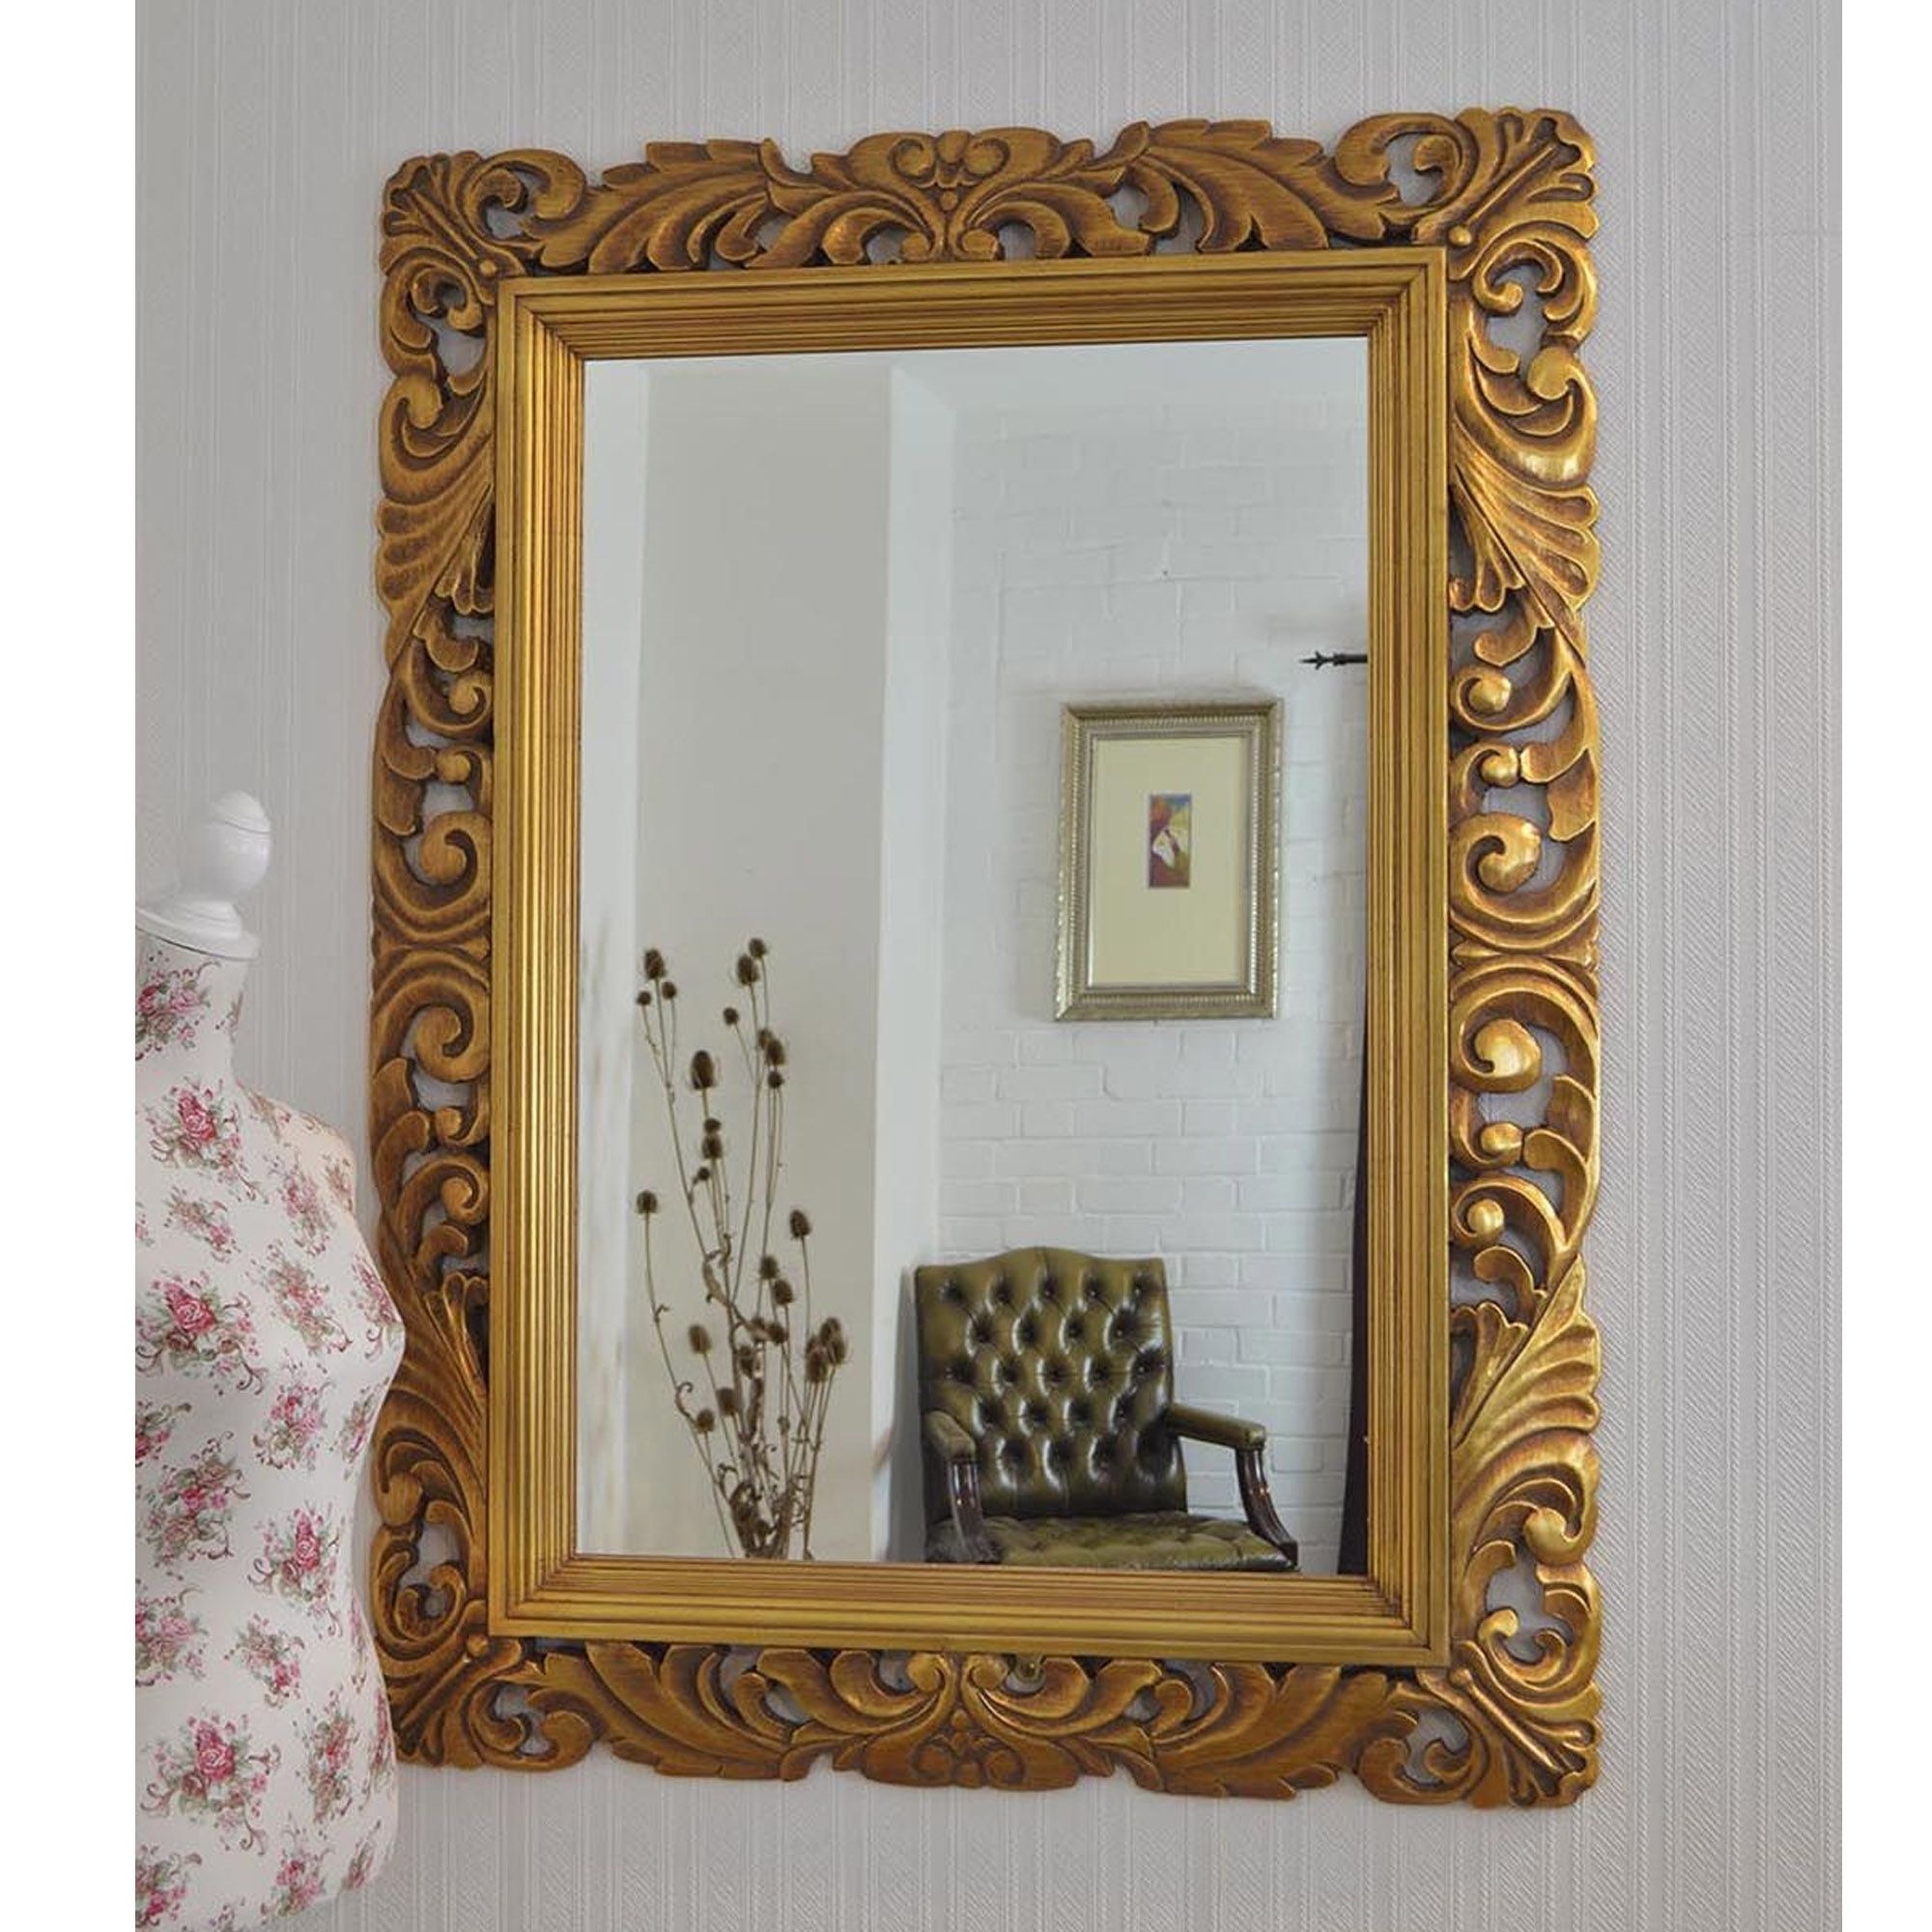 2020 Ornate Framed Gold Antique French Style Wall Mirror – French Mirrors Intended For Antiqued Glass Wall Mirrors (View 2 of 15)